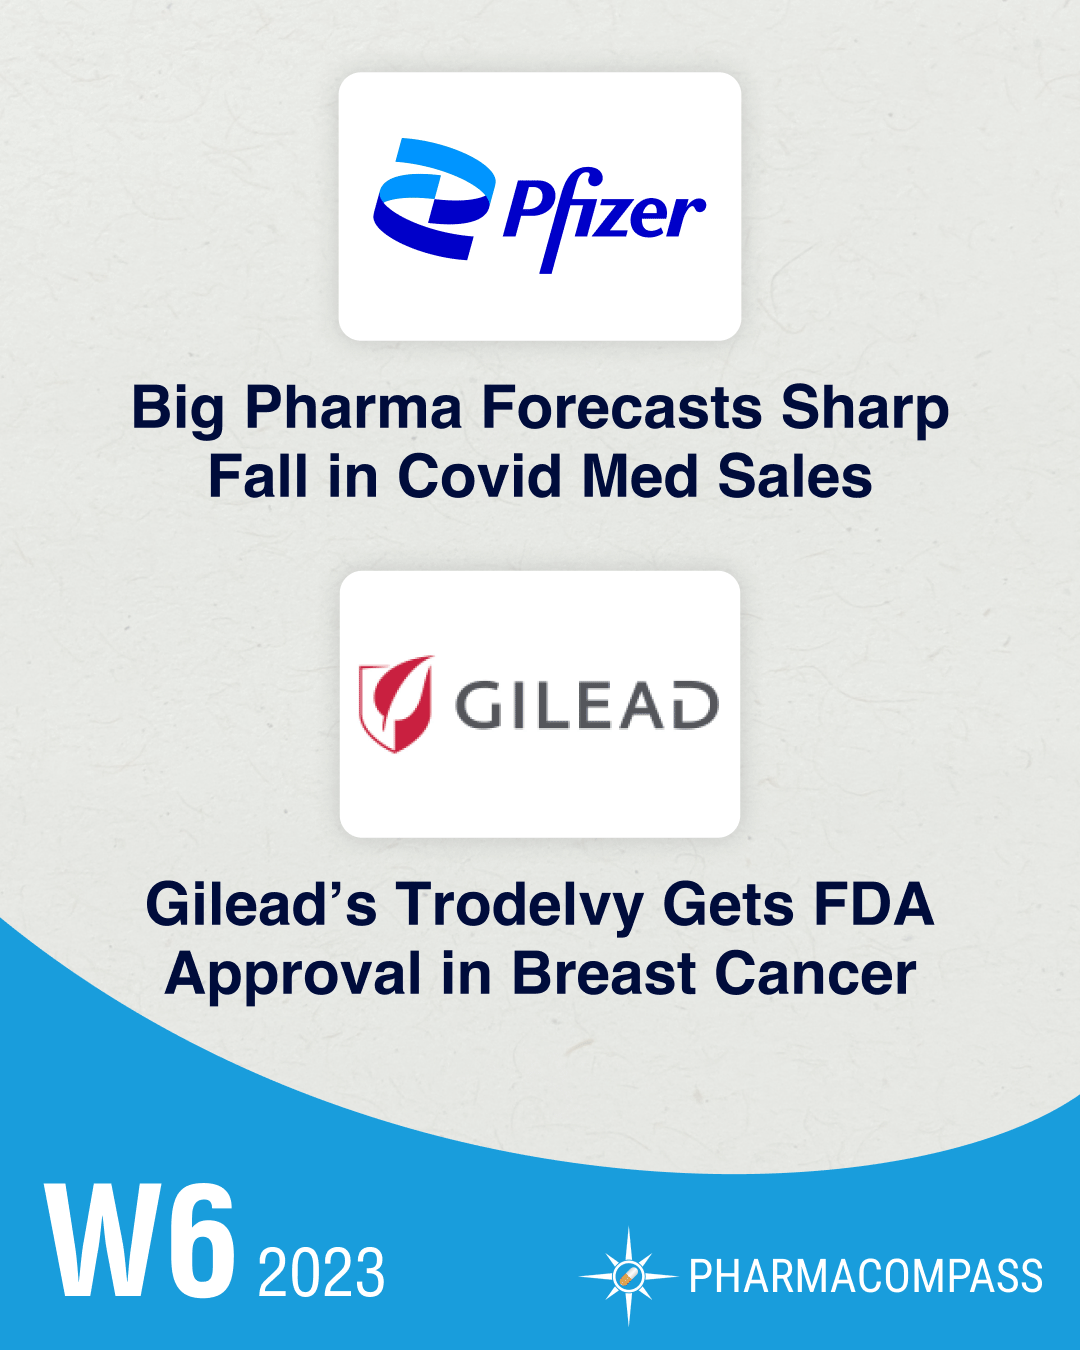 Drugmakers to face Covid cliff in 2023; Gilead’s Trodelvy approved for breast cancer